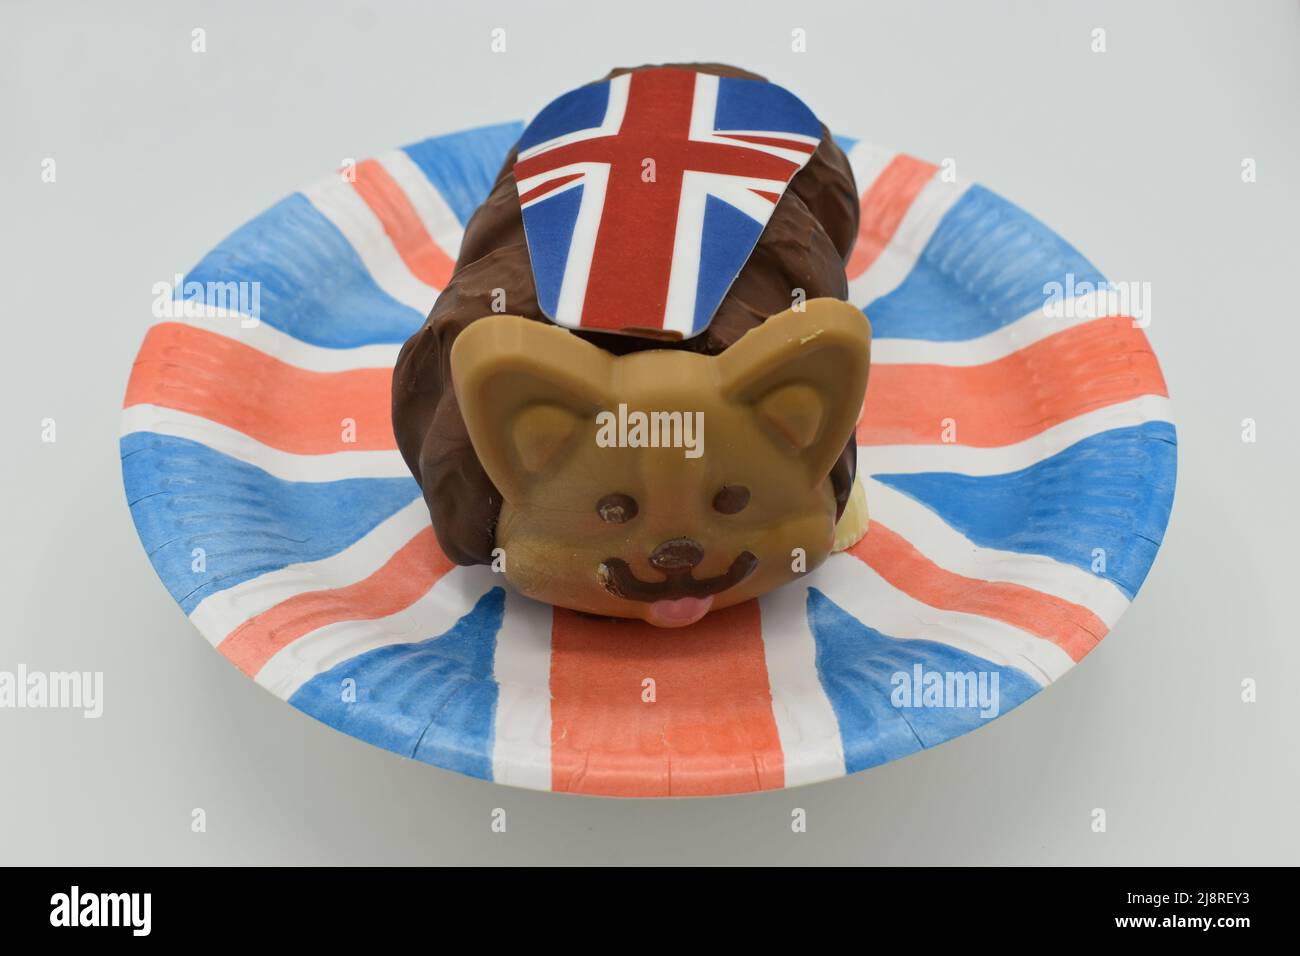 Marks and Spencer have produced the Corgi and Queen Connie the Caterpillar Cake for the Queen’s Platinum Jubilee celebrations. This is the corgi cake. Stock Photo